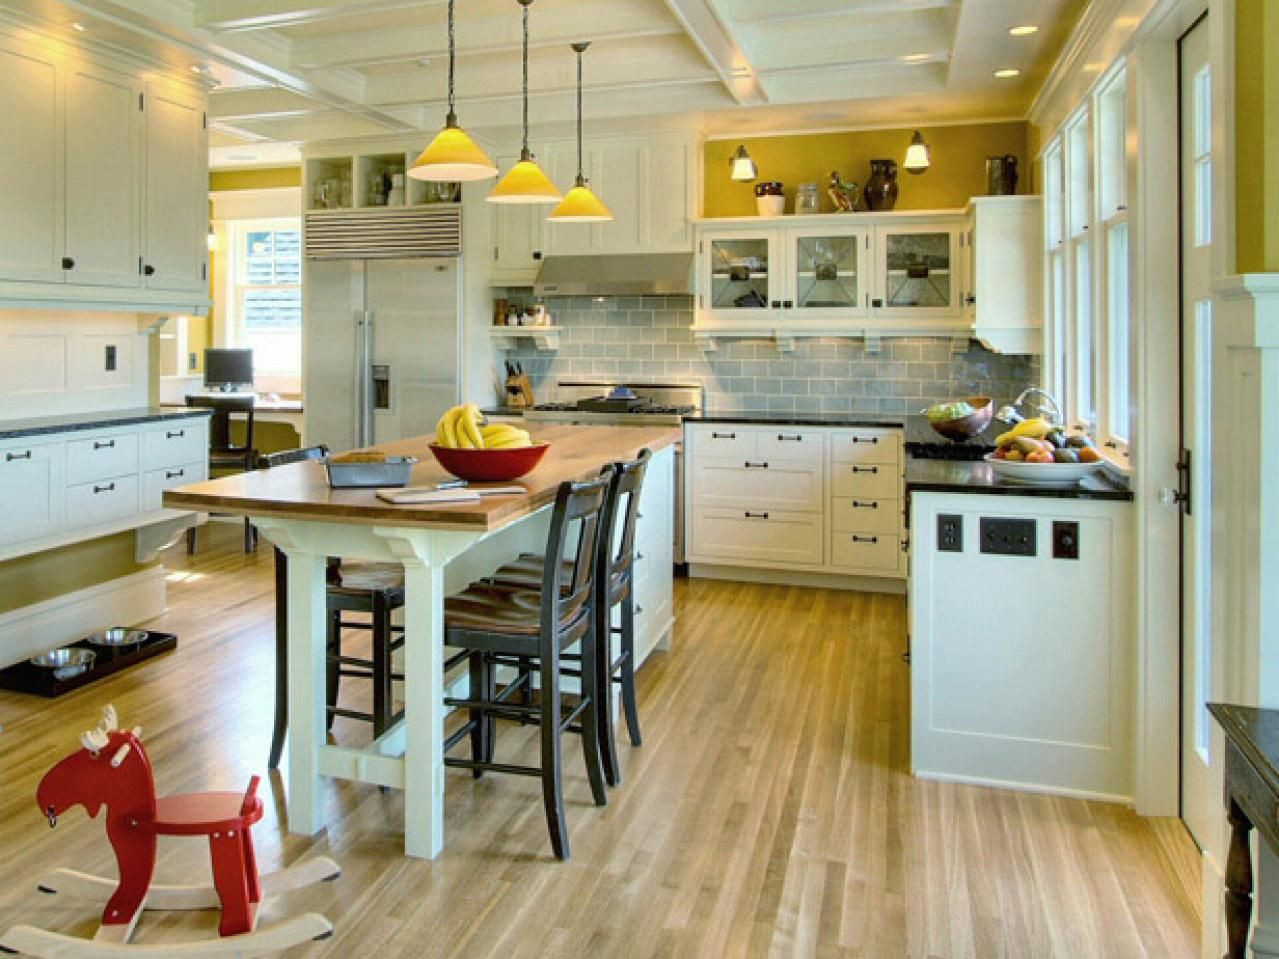 Kitchen Designs With Islands
 These 20 Stylish Kitchen Island Designs Will Have You